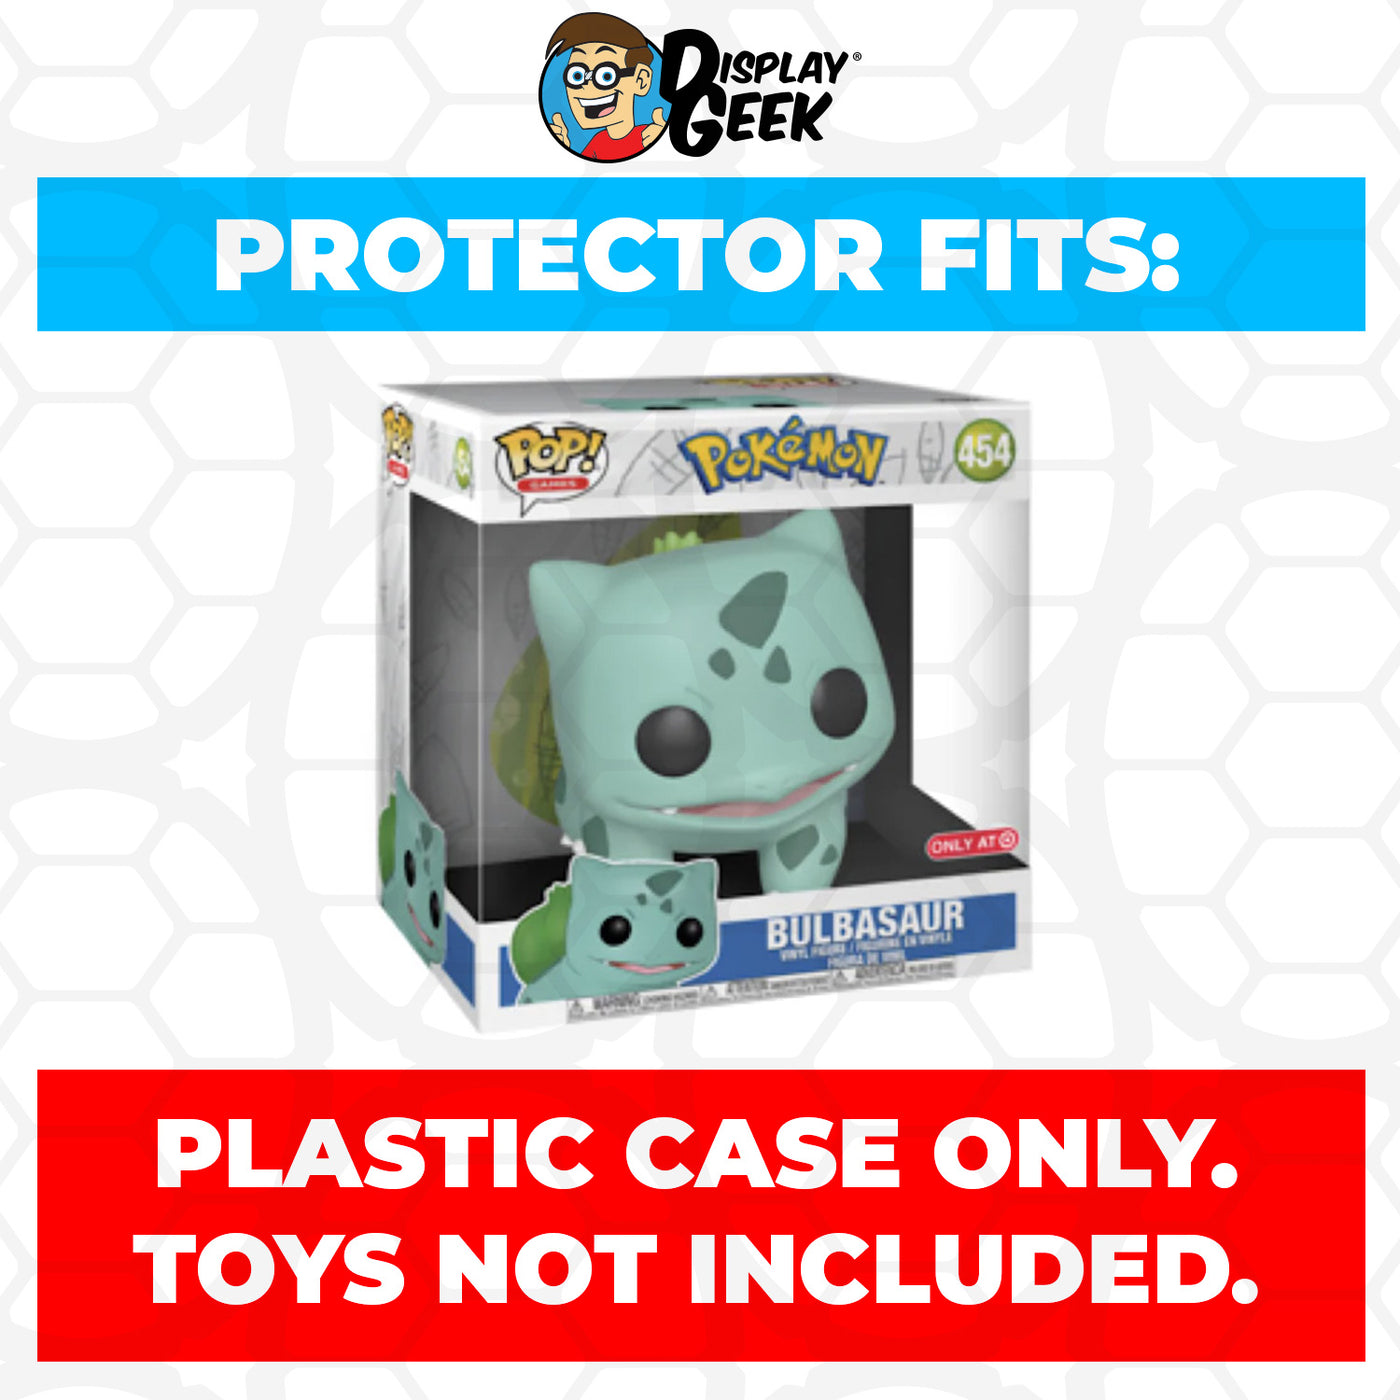 Pop Protector for 10 inch Bulbasaur #454 Jumbo Funko Pop on The Protector Guide App by Display Geek